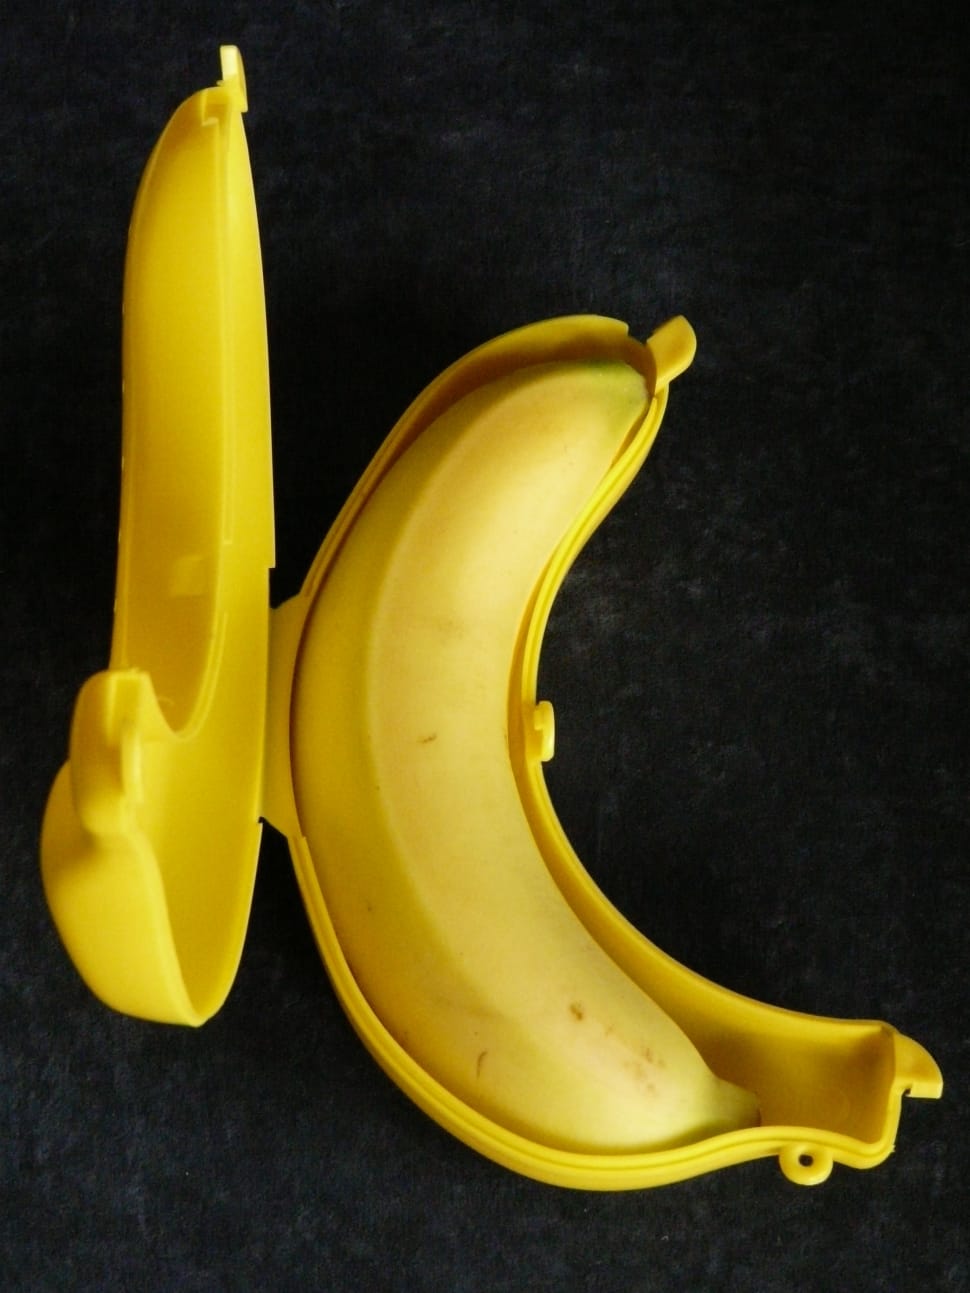 yellow banana fruit with case preview